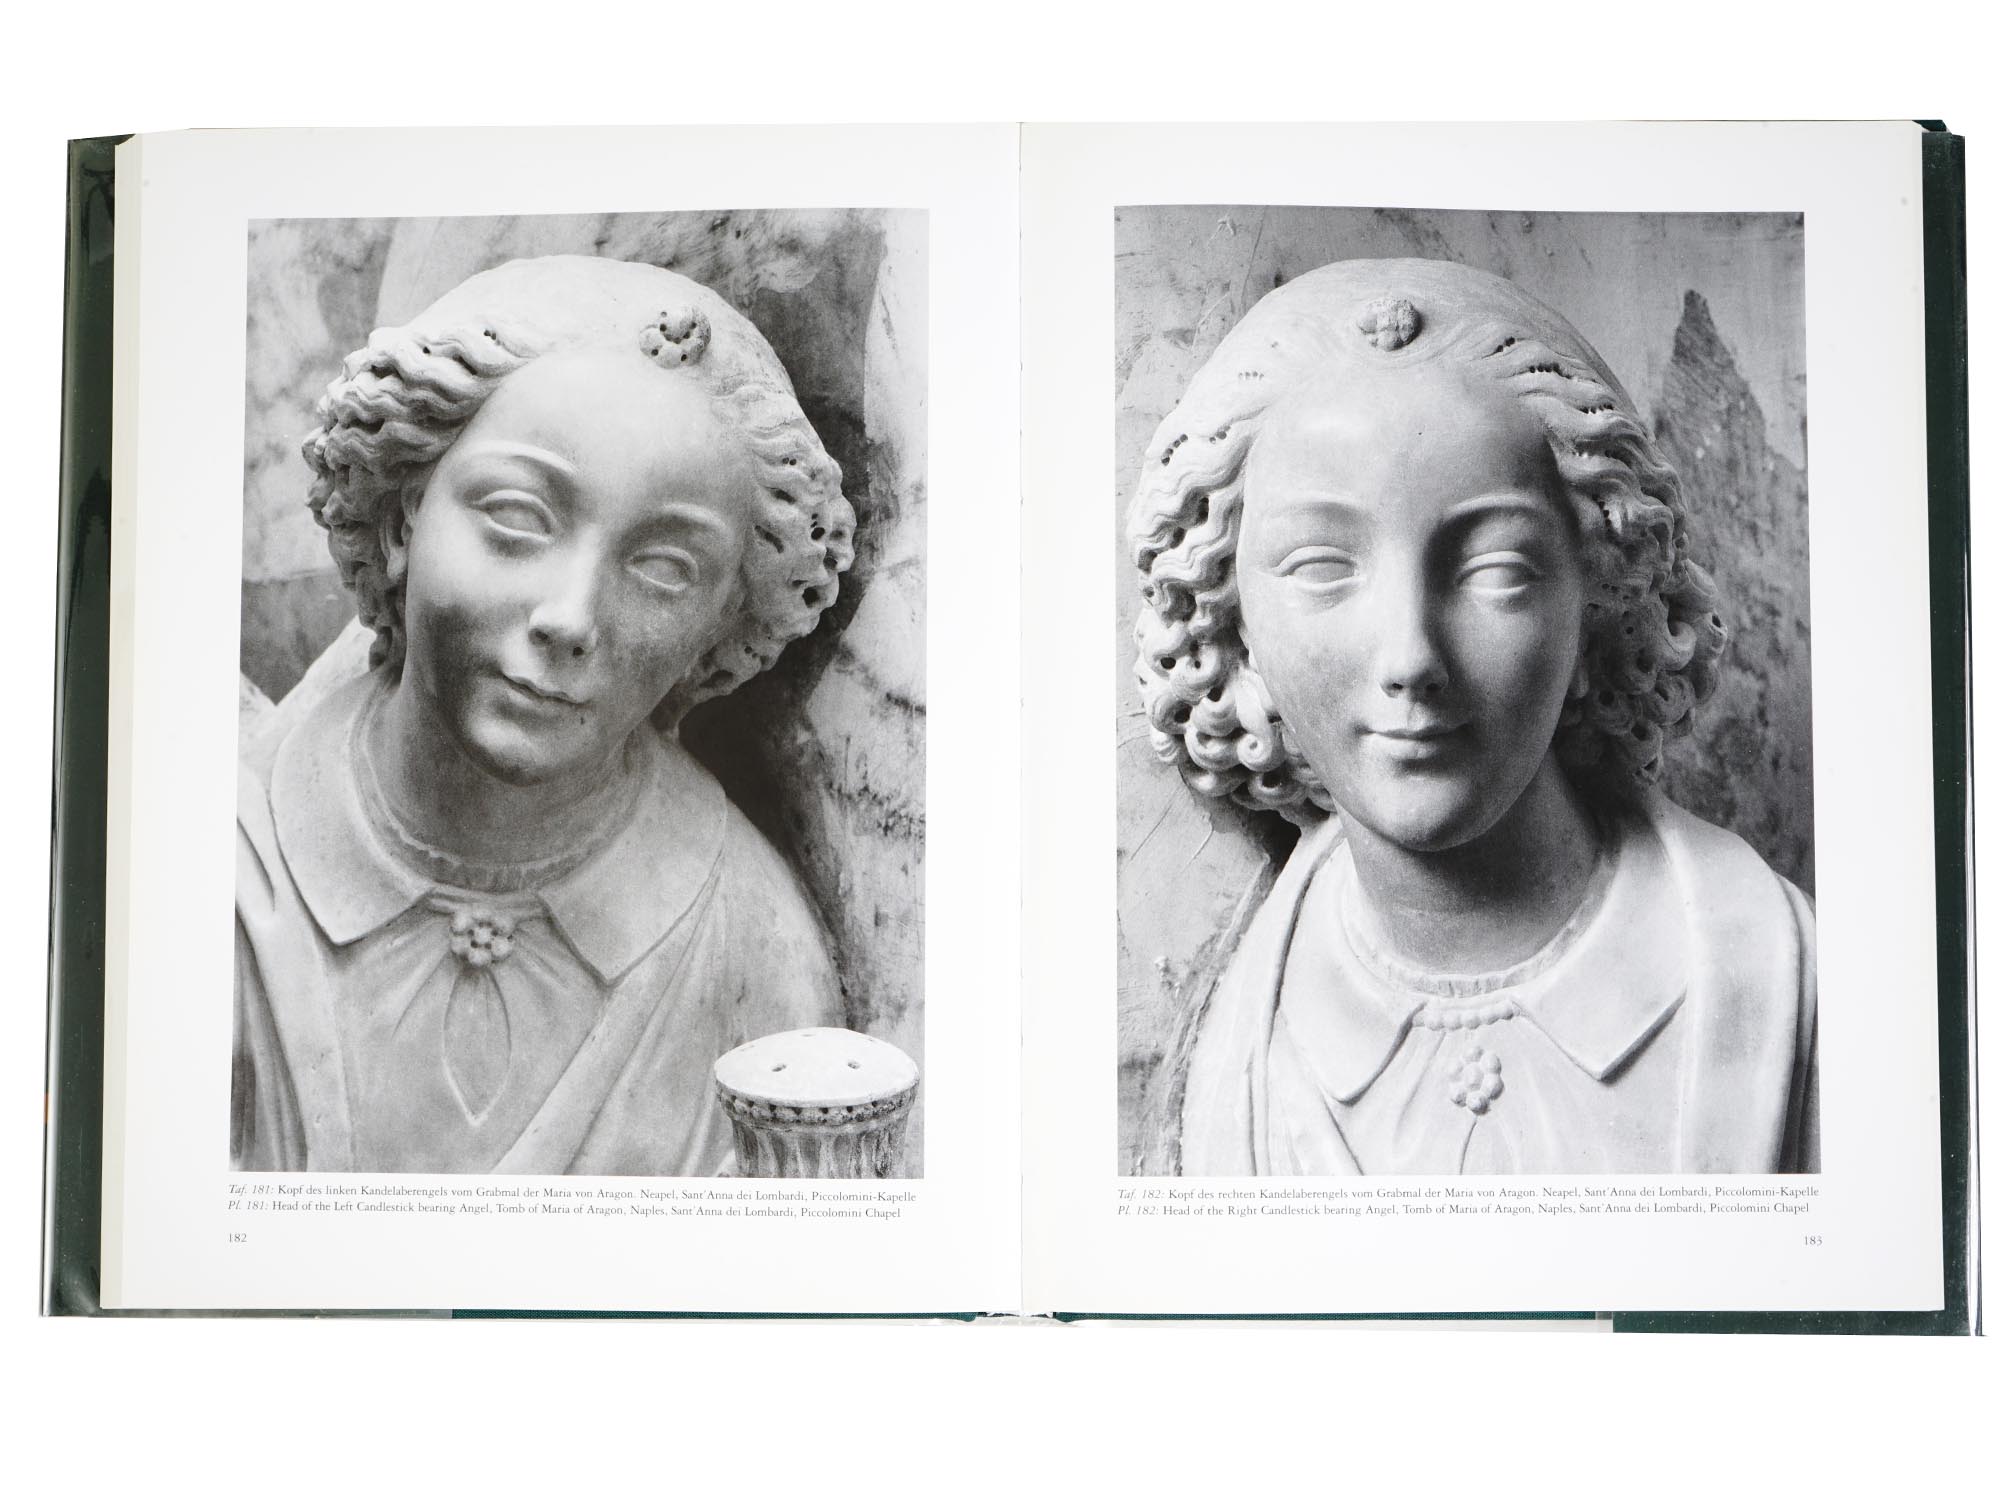 ART BOOKS AND ALBUMS ON ITALIAN SCULPTURE PIC-8